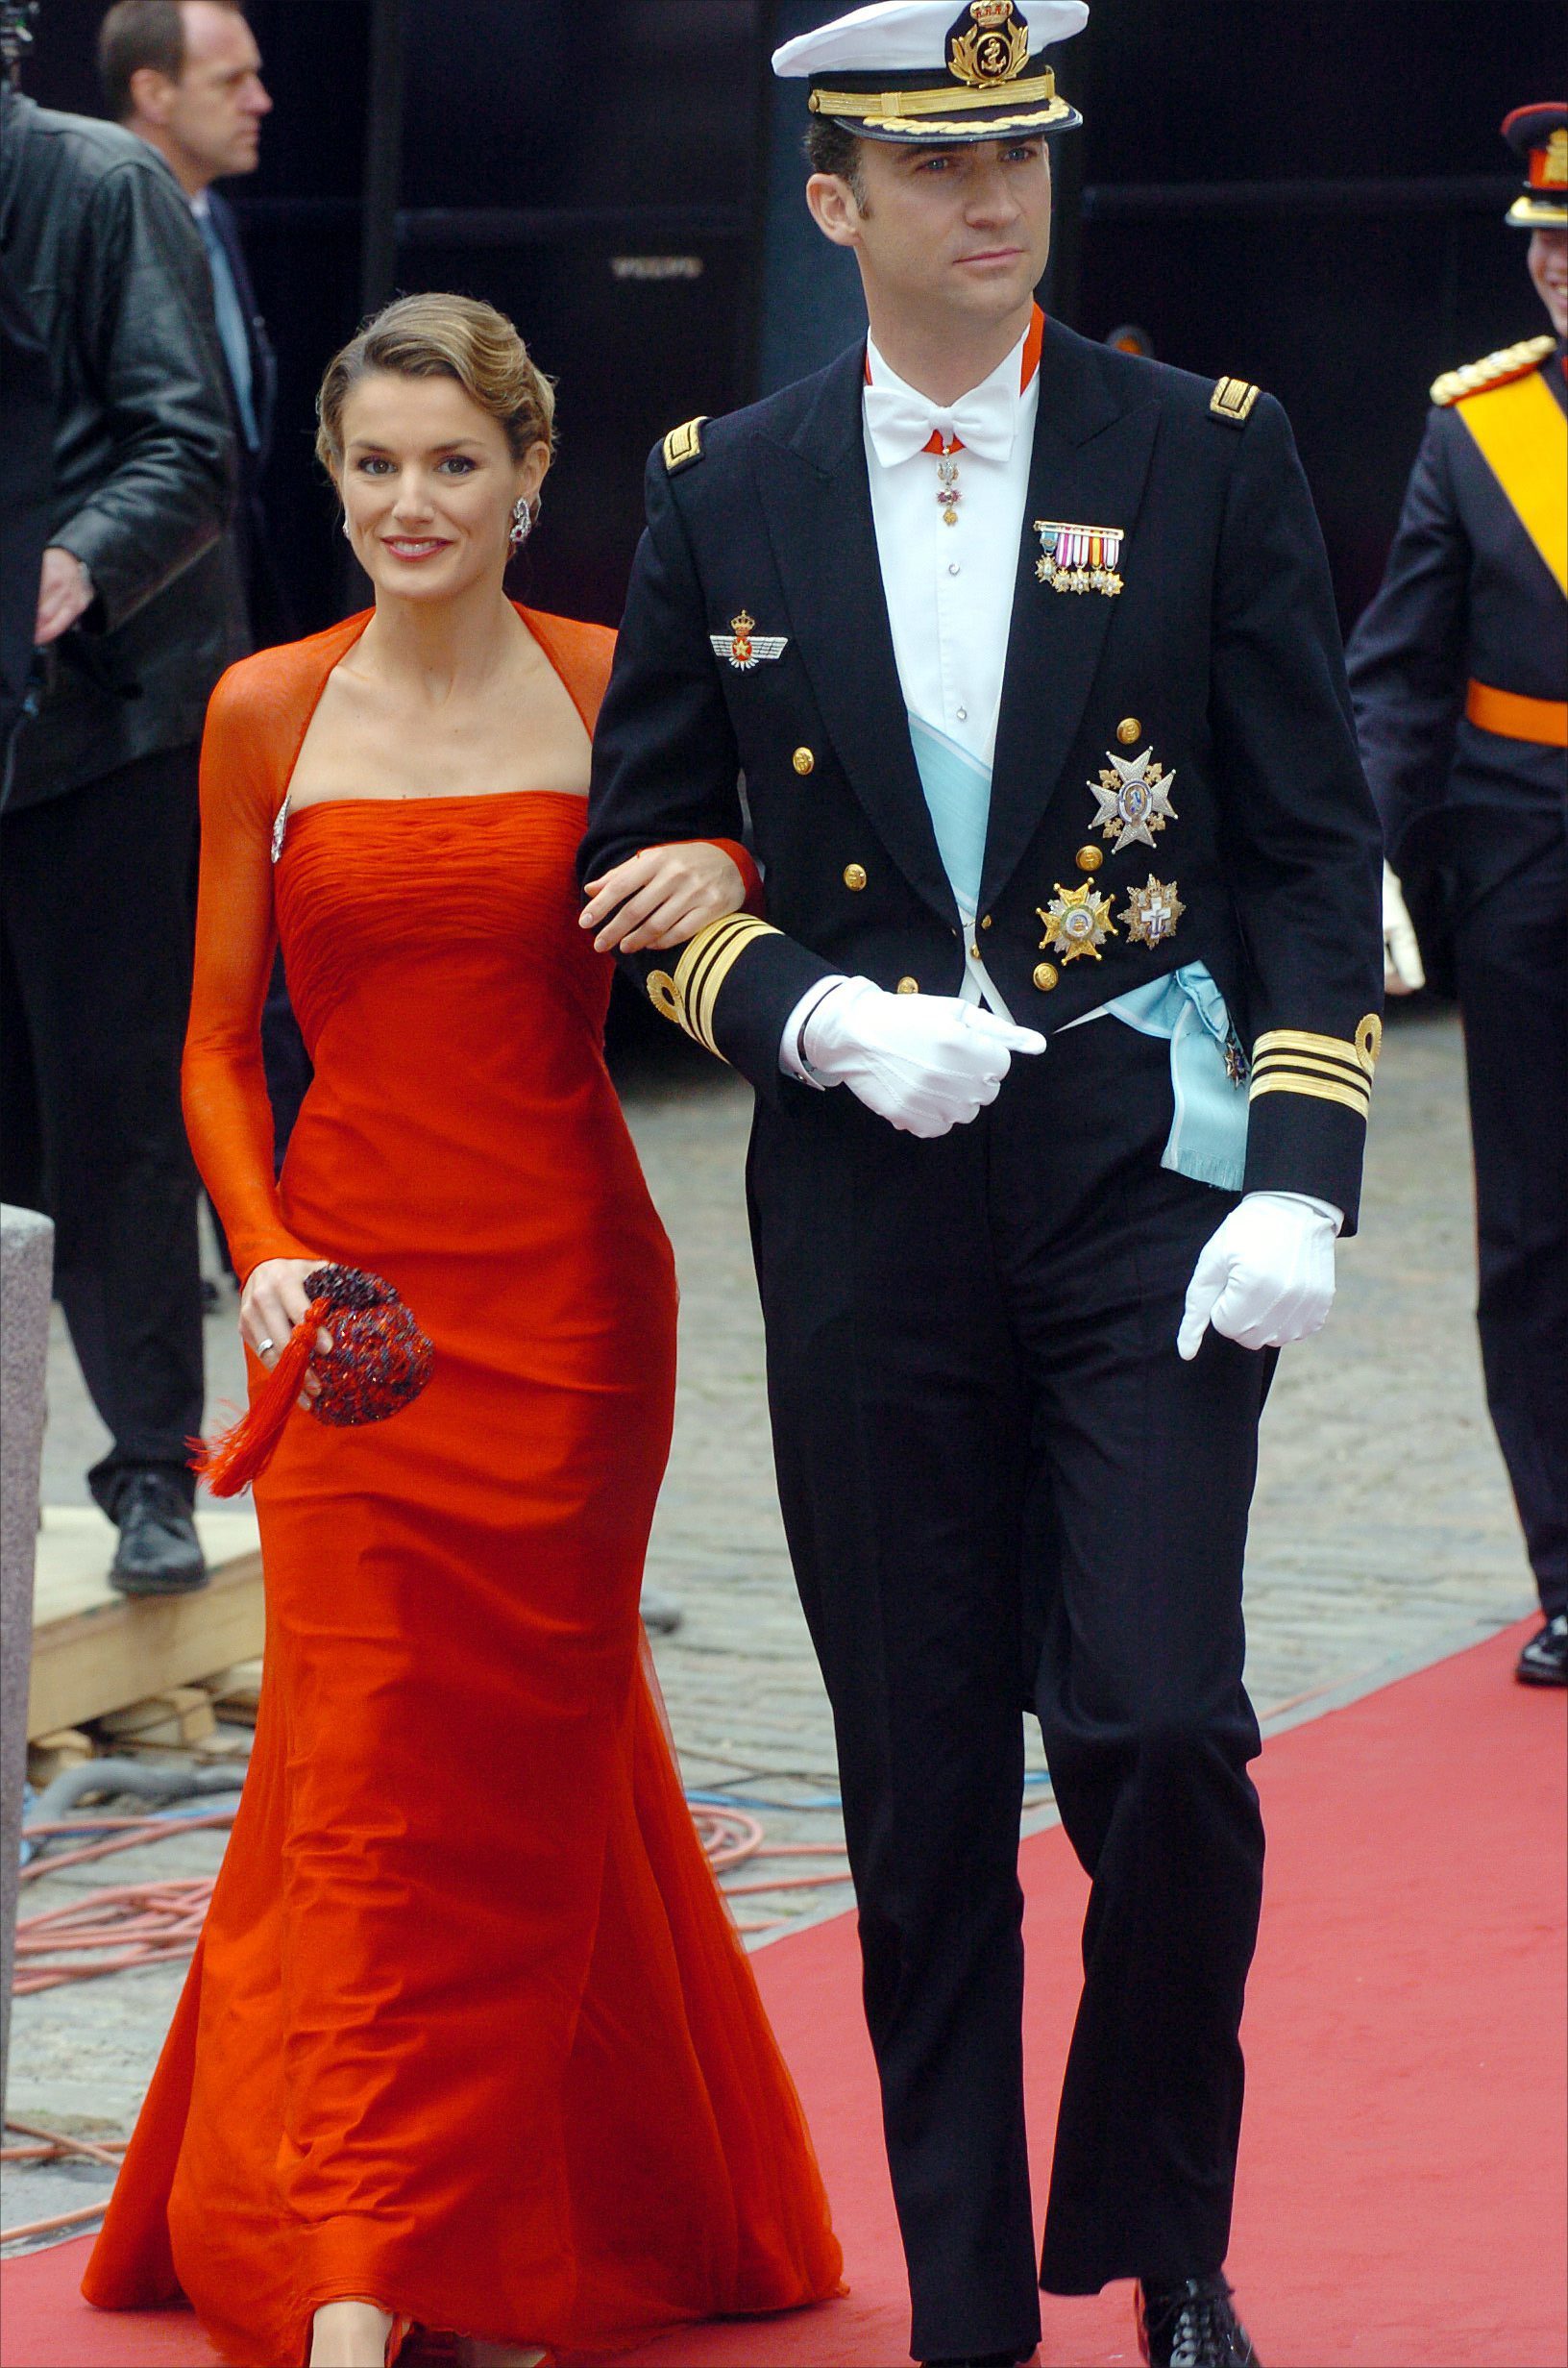 Queen Letizia in a red dress by Roberto Caprile.